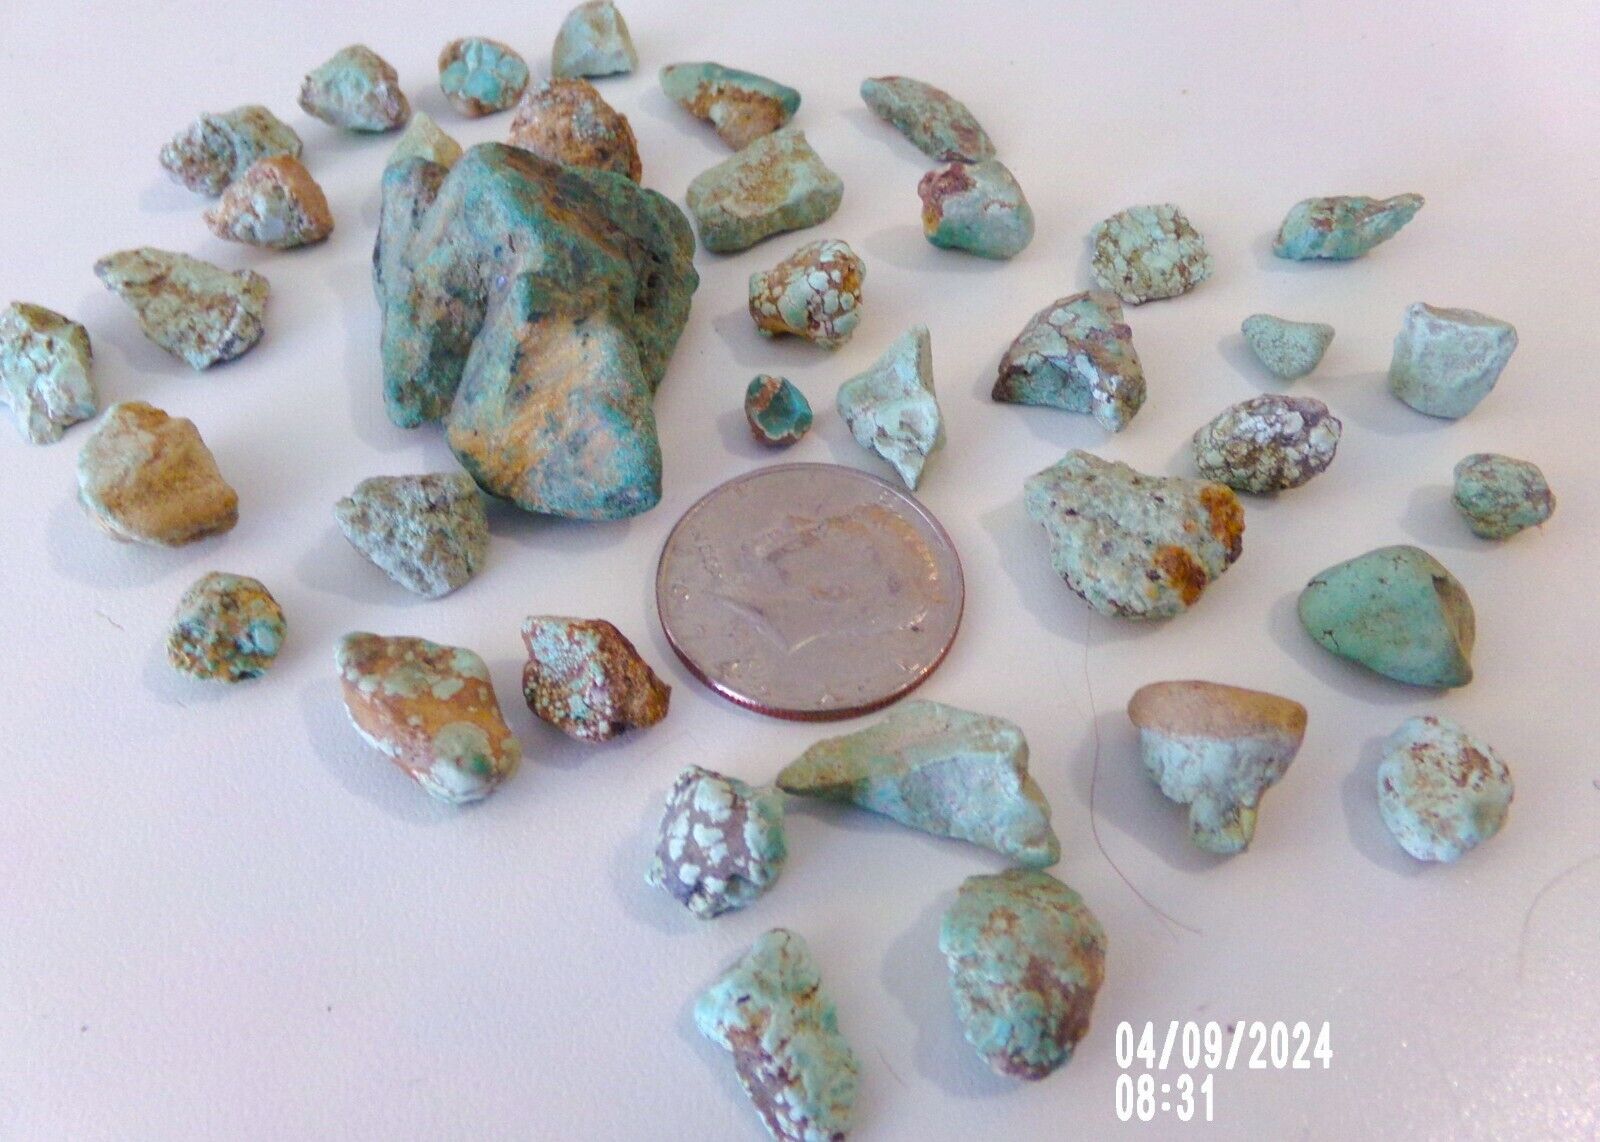 Rough & Tumbled No. 8 Turquoise Rare Carlin, NV Old Stock 119g Blue/Green Nodule